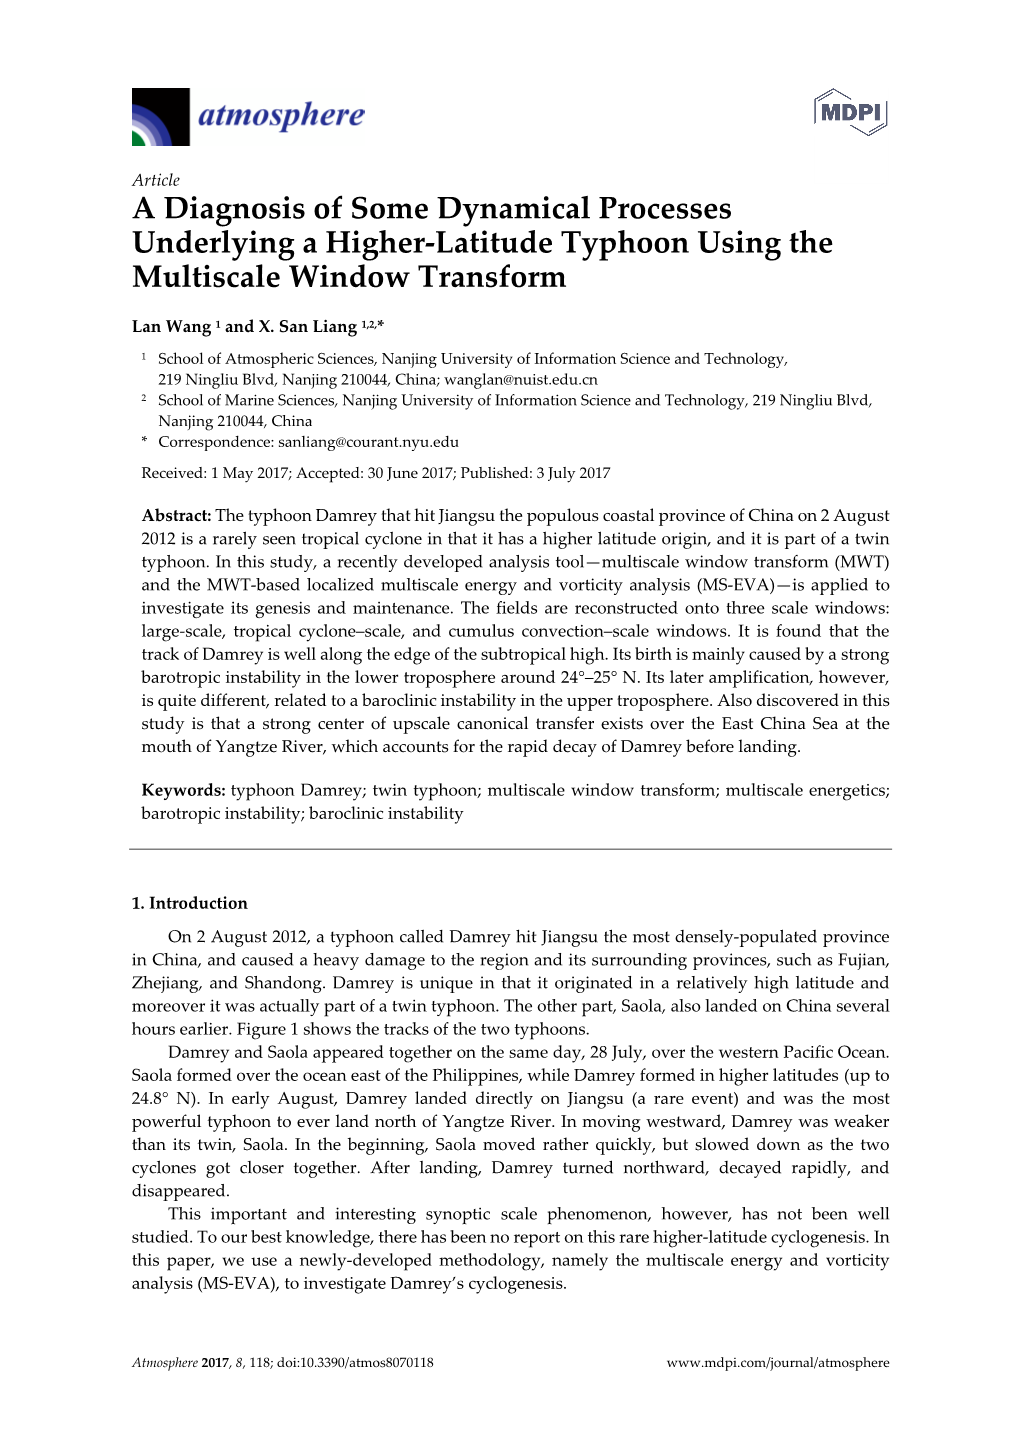 A Diagnosis of Some Dynamical Processes Underlying a Higher-Latitude Typhoon Using the Multiscale Window Transform